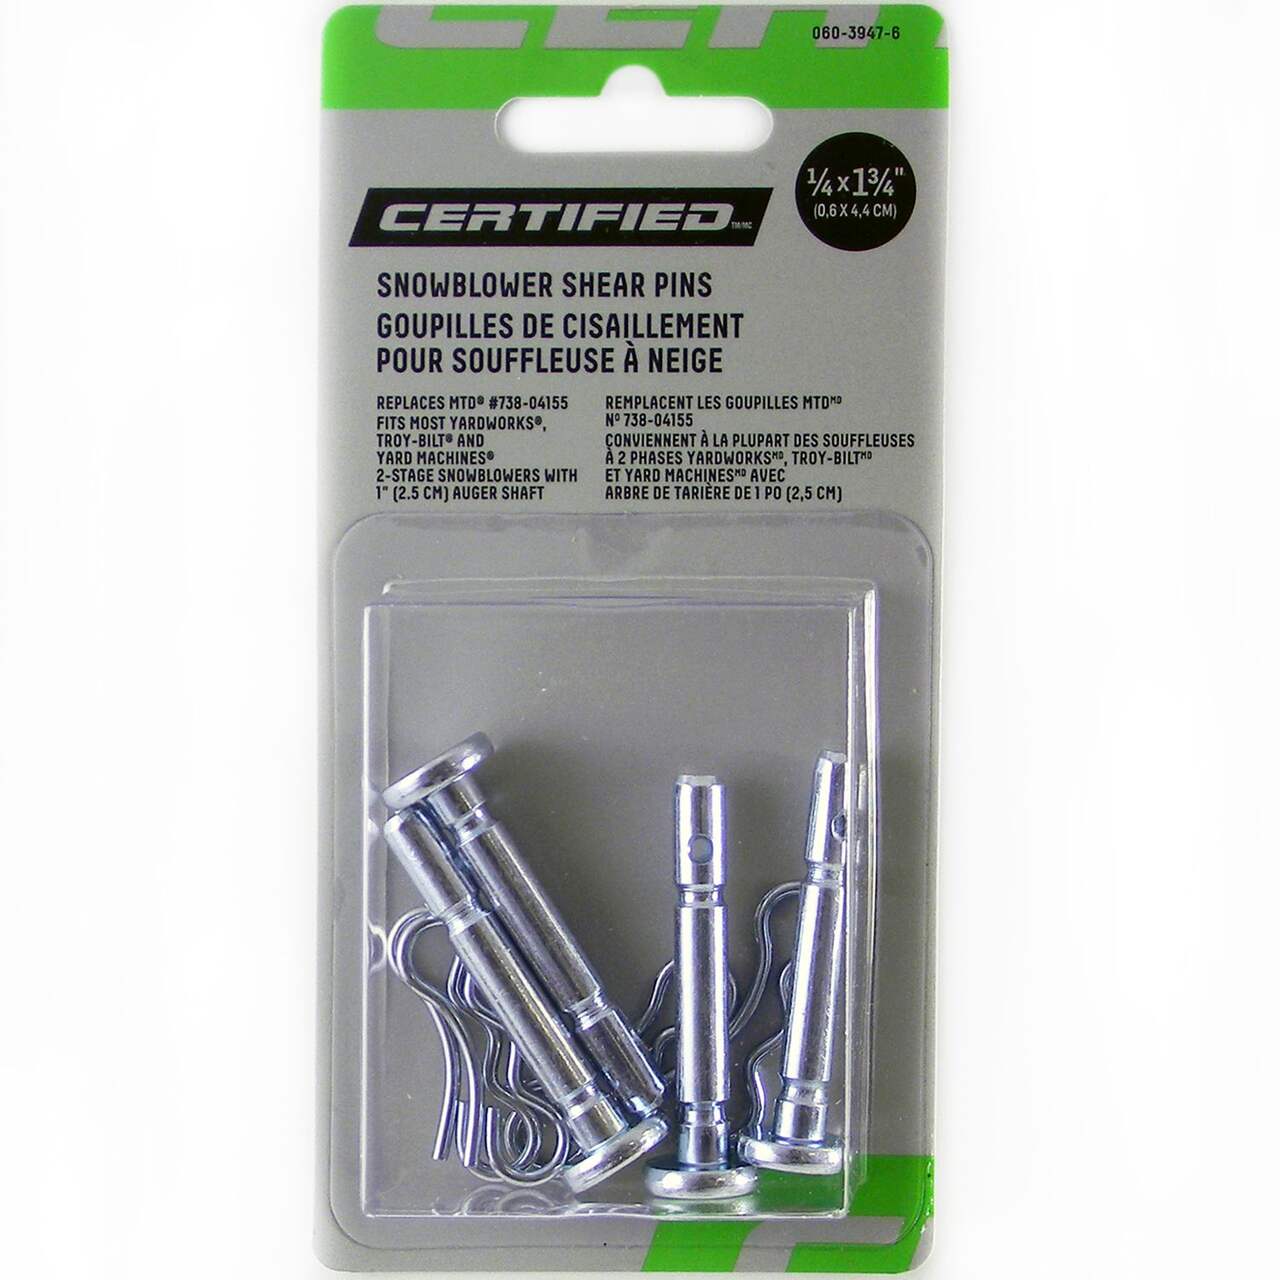 Certified Snowblower Replacement Shear Bolt, 4 Pk., 5/16 x 1.75-in